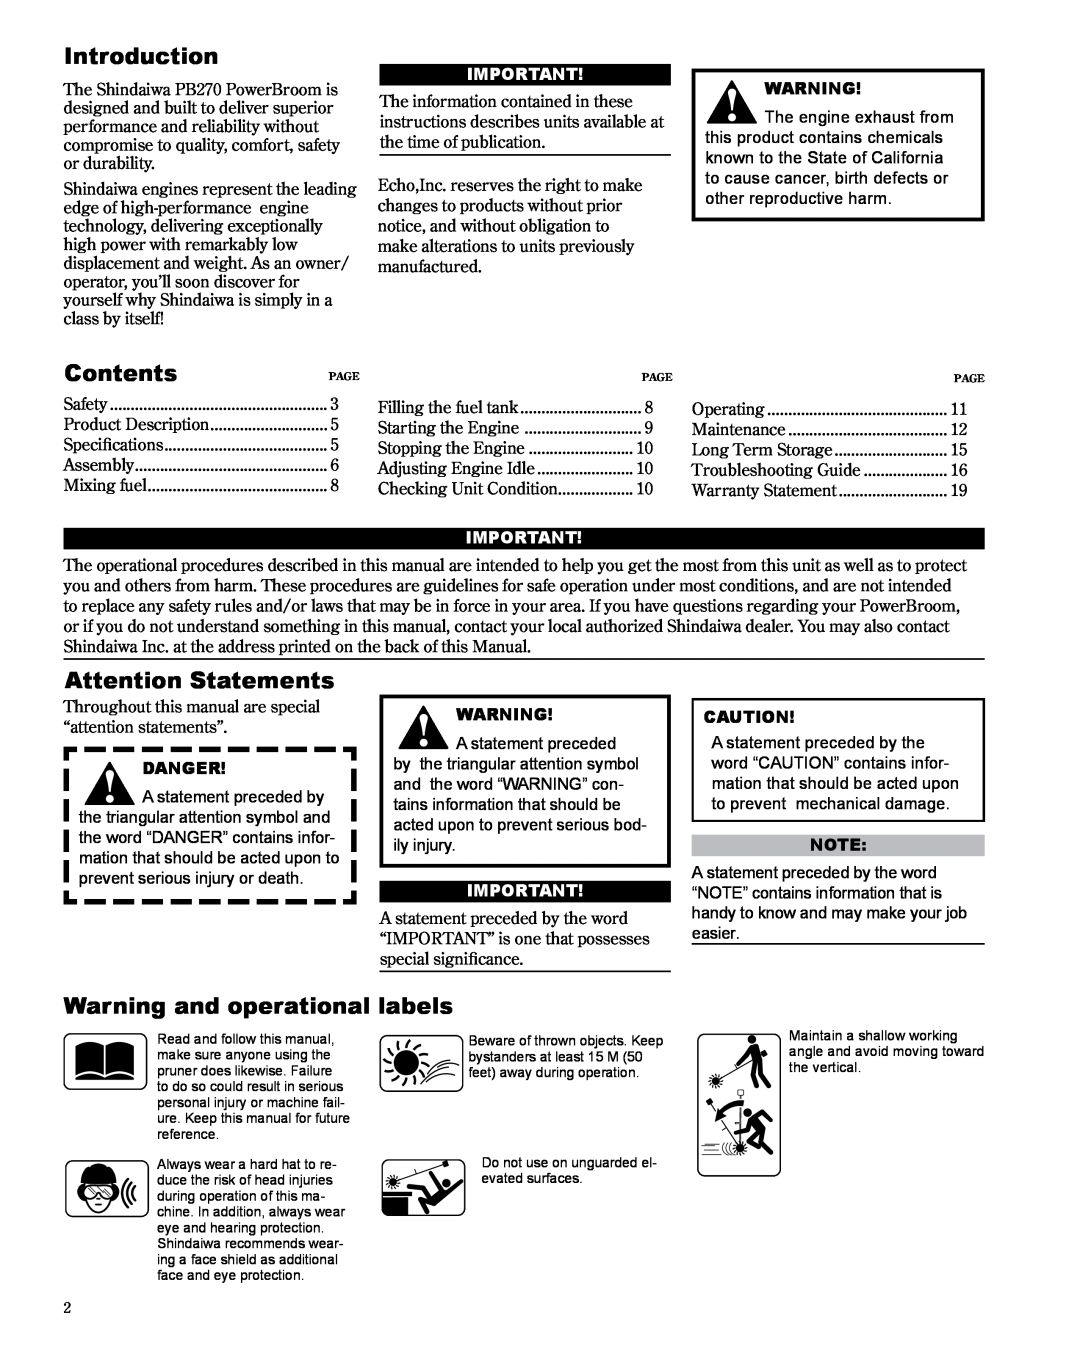 Shindaiwa X7502235300, PB270 manual Introduction, Contents, Attention Statements, Warning and operational labels, Danger 